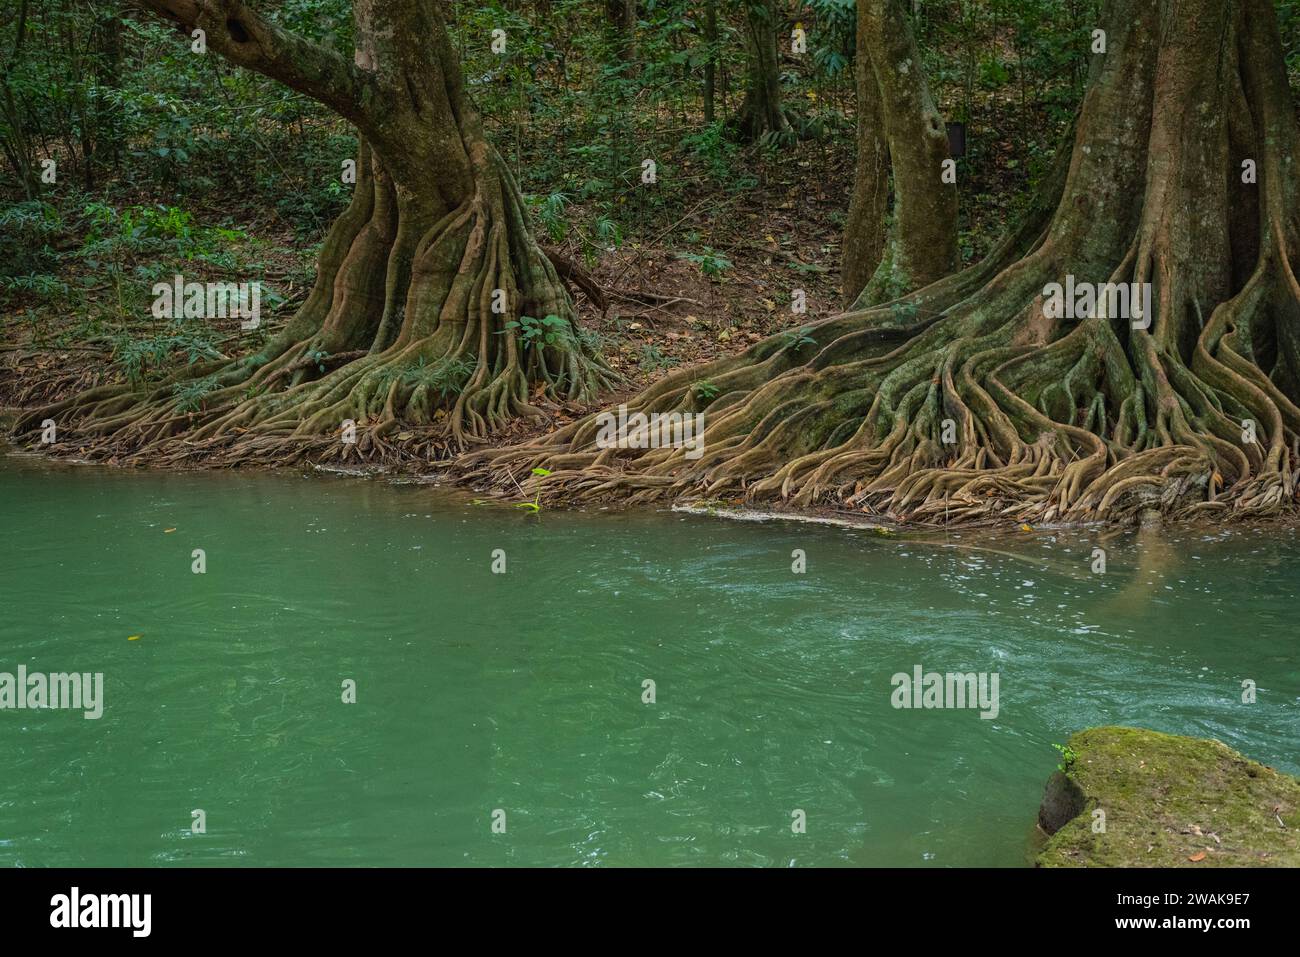 Banyan trees with bizarre roots by river in Chet Sao Noi National Park, Thailand. Stock Photo